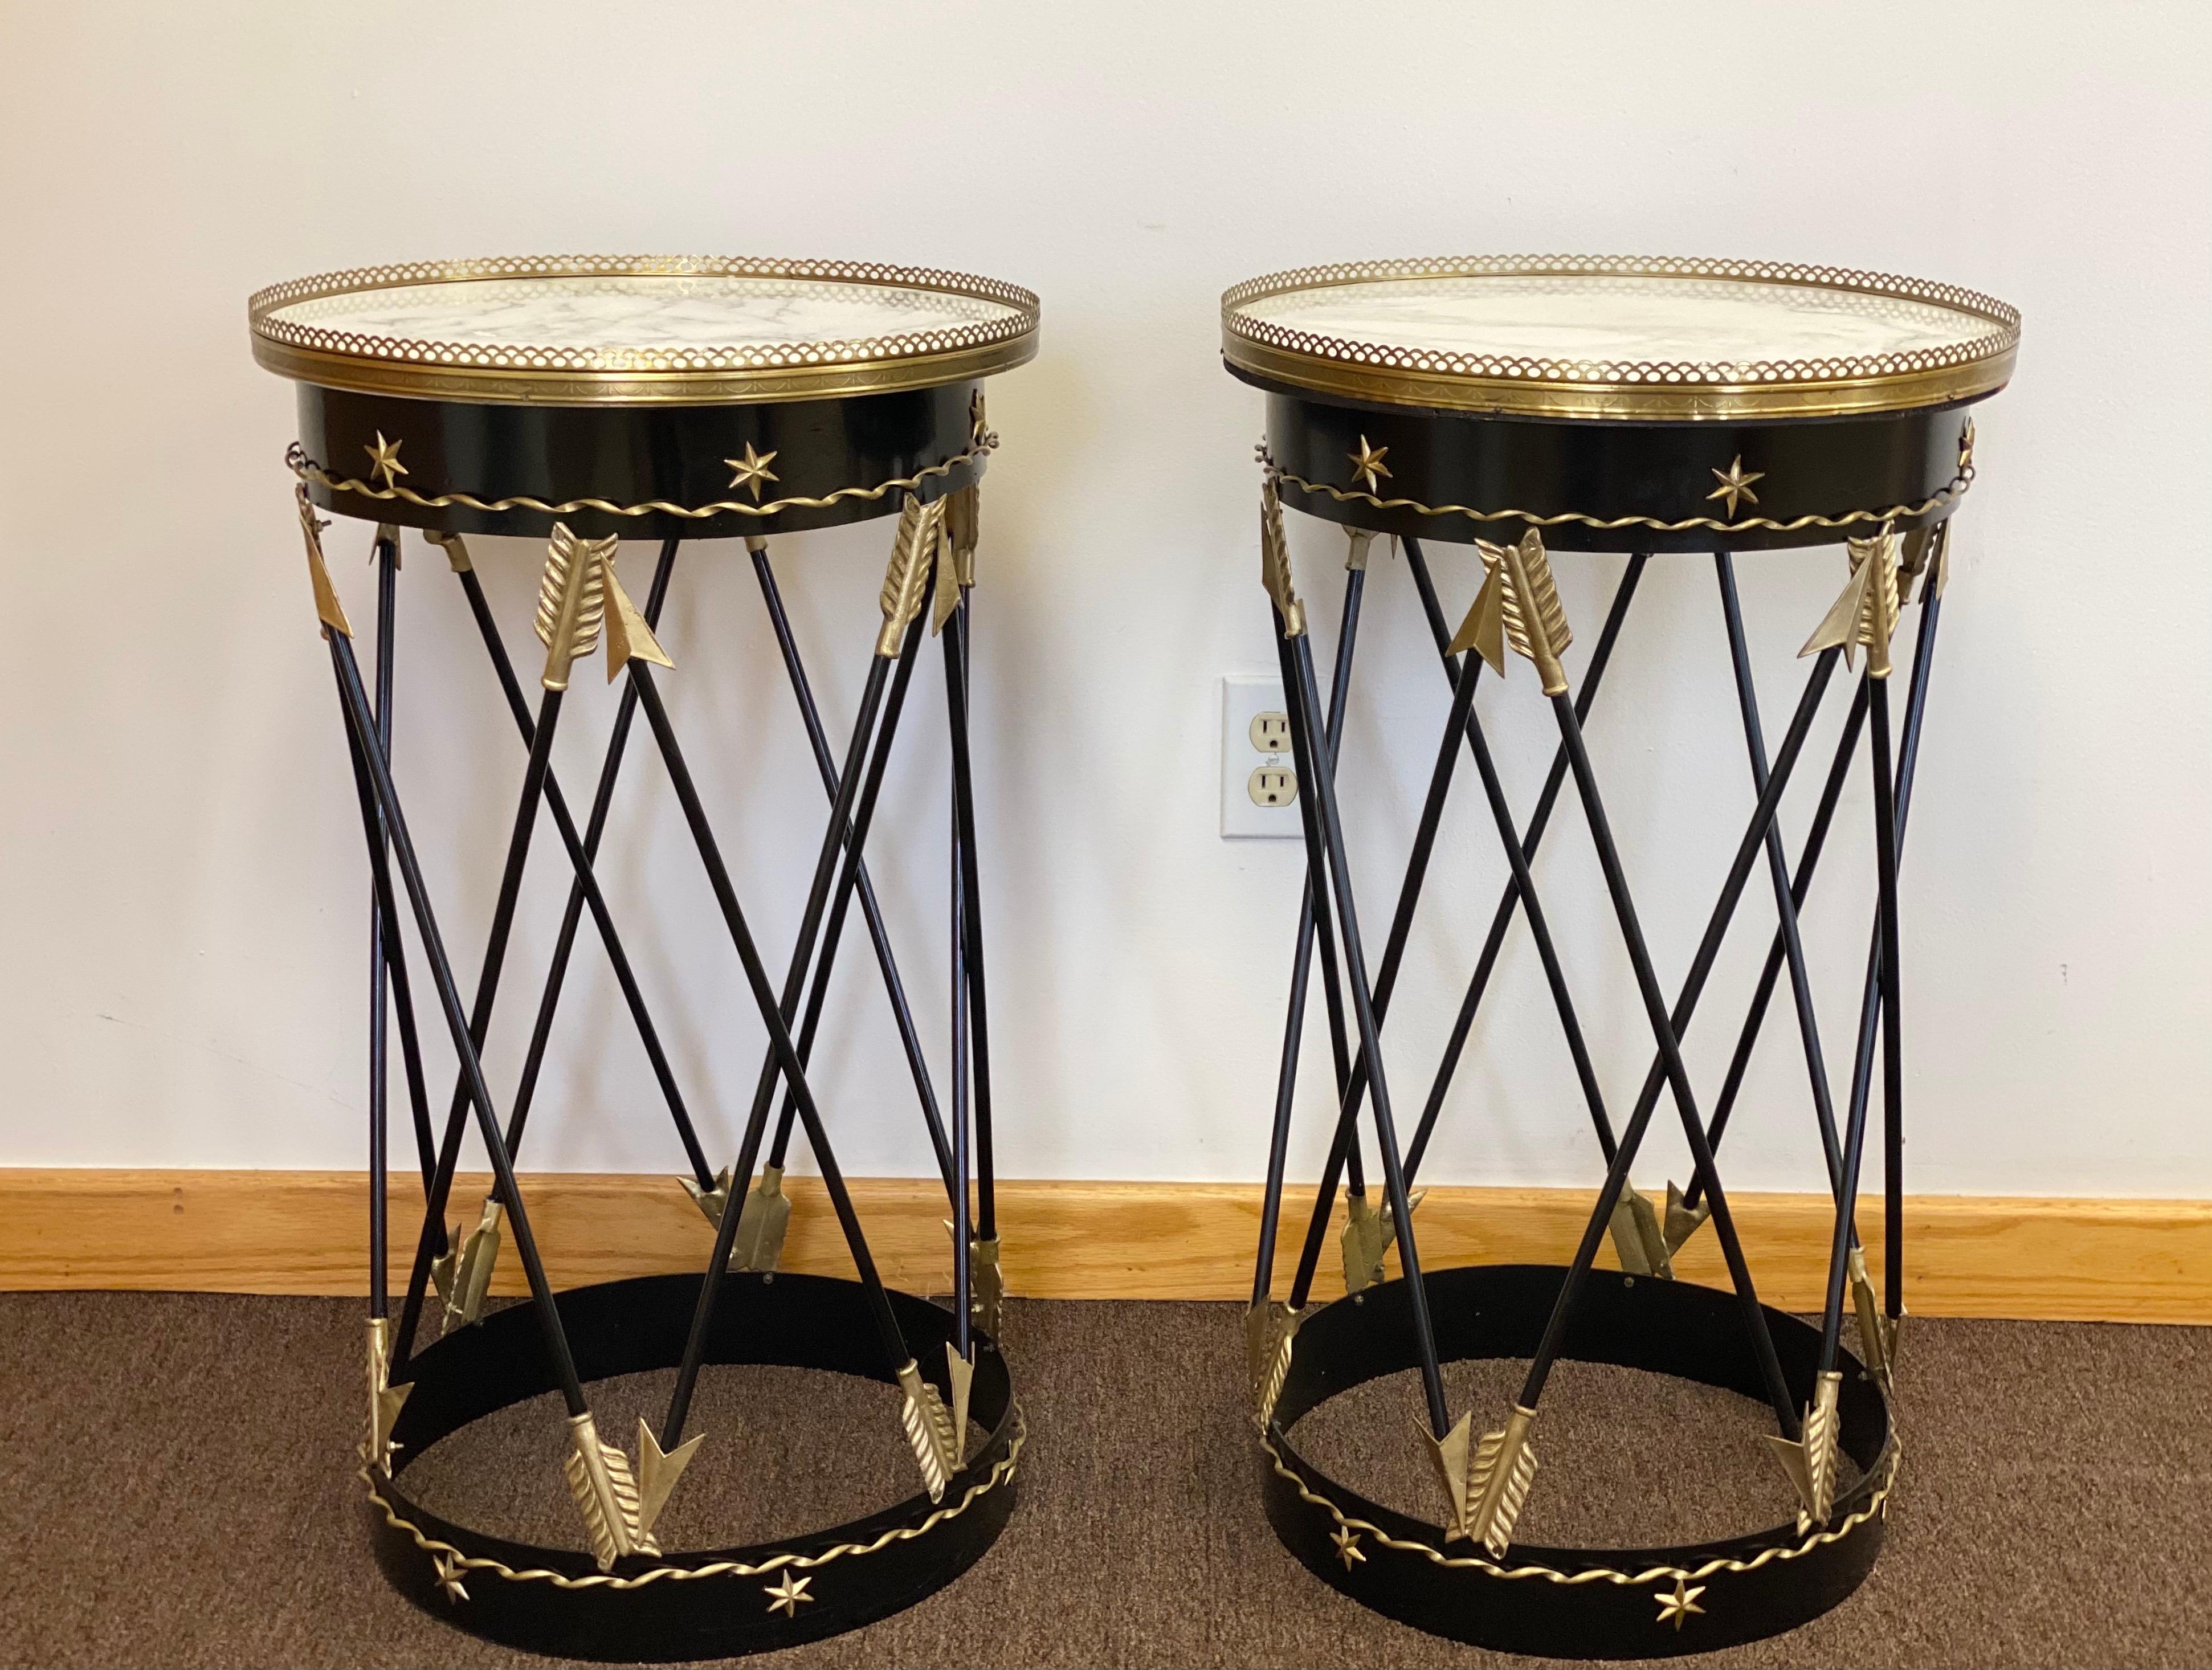 We are very pleased to offer a beautiful, Neoclassical style, restored set of side tables, circa the 1900s. This stunning pair has a wonderful sculptural iron frame and showcases a bronze cross arrow design, gilt roping trim and a brass gallery